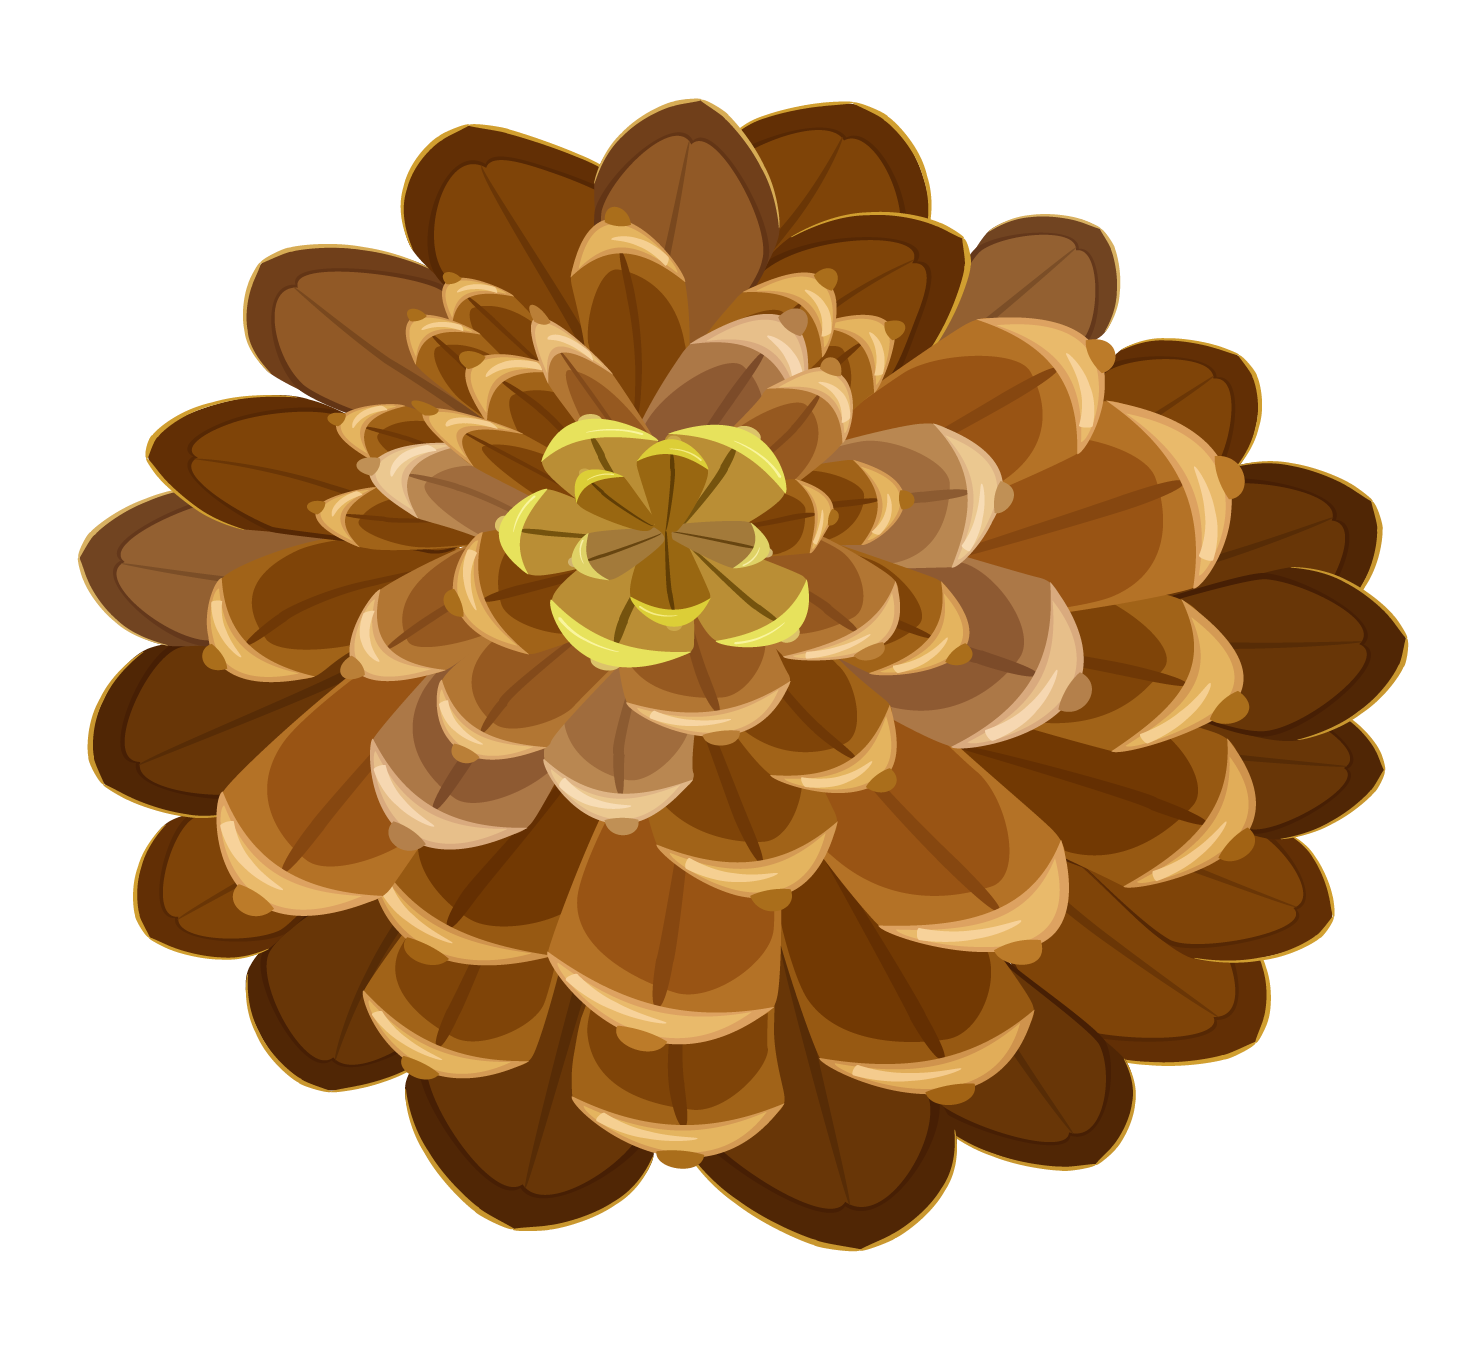 Pine Cone clipart #3, Download drawings